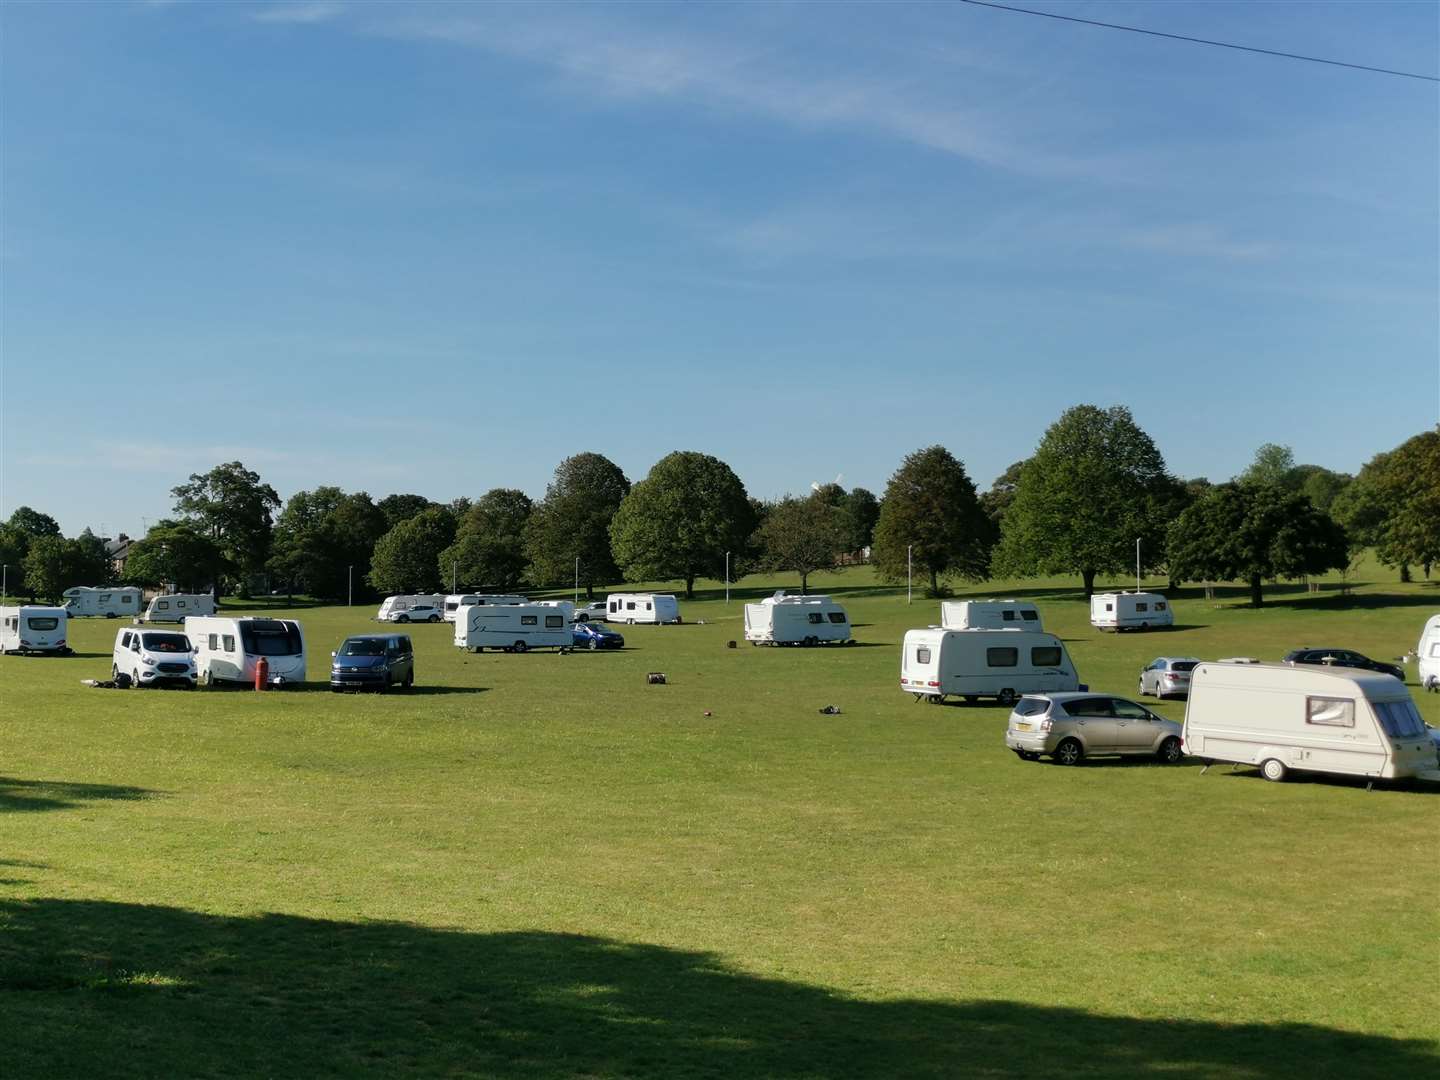 The travellers in Dane Park in Margate are understood to have travelled down from Hampshire